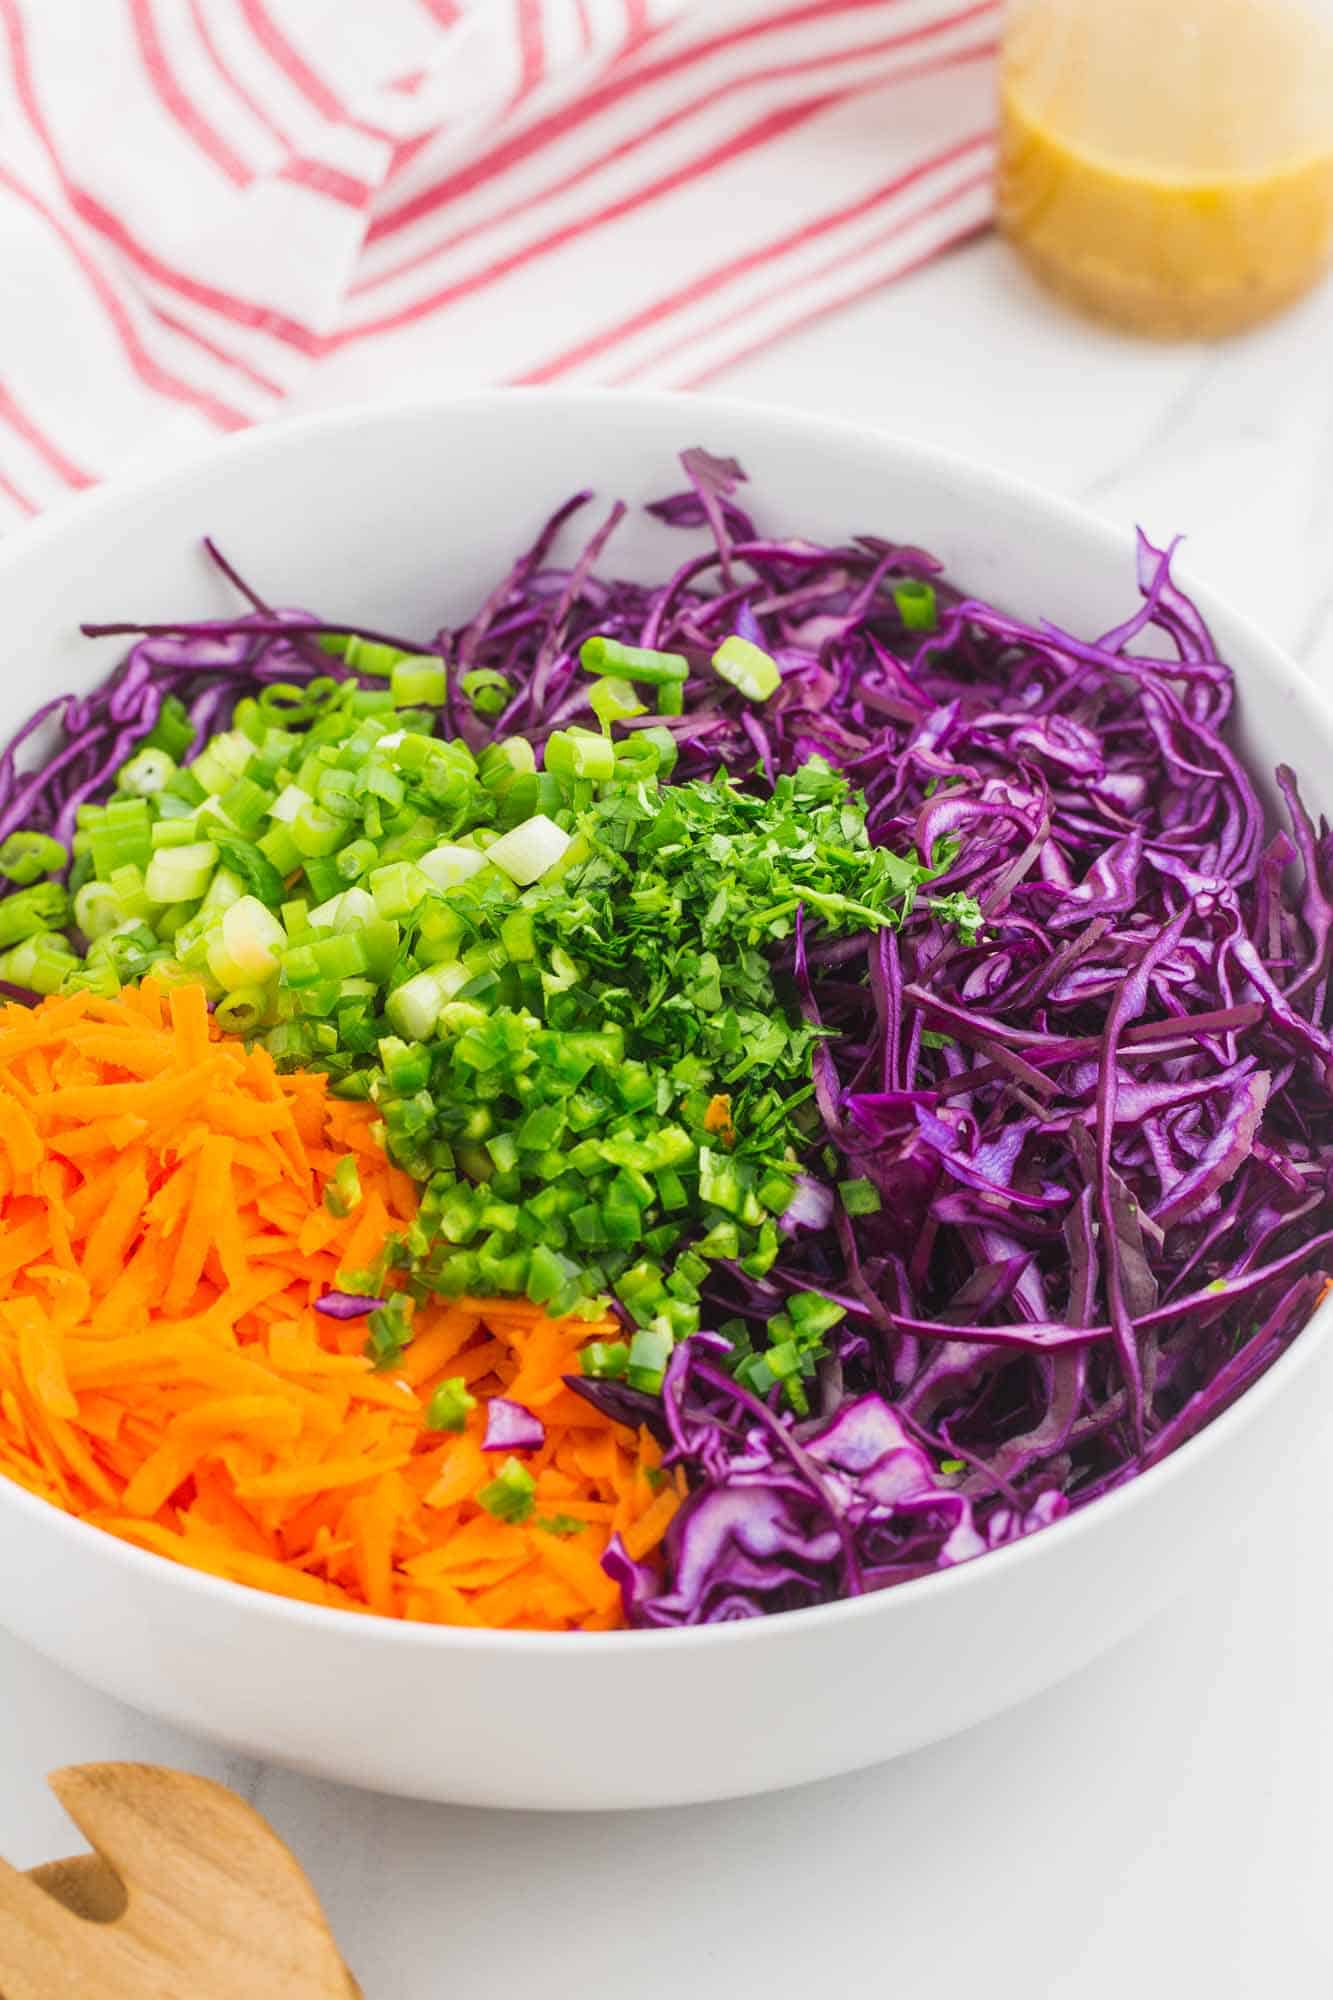 Slaw ingredients in a large white bowl before mixing